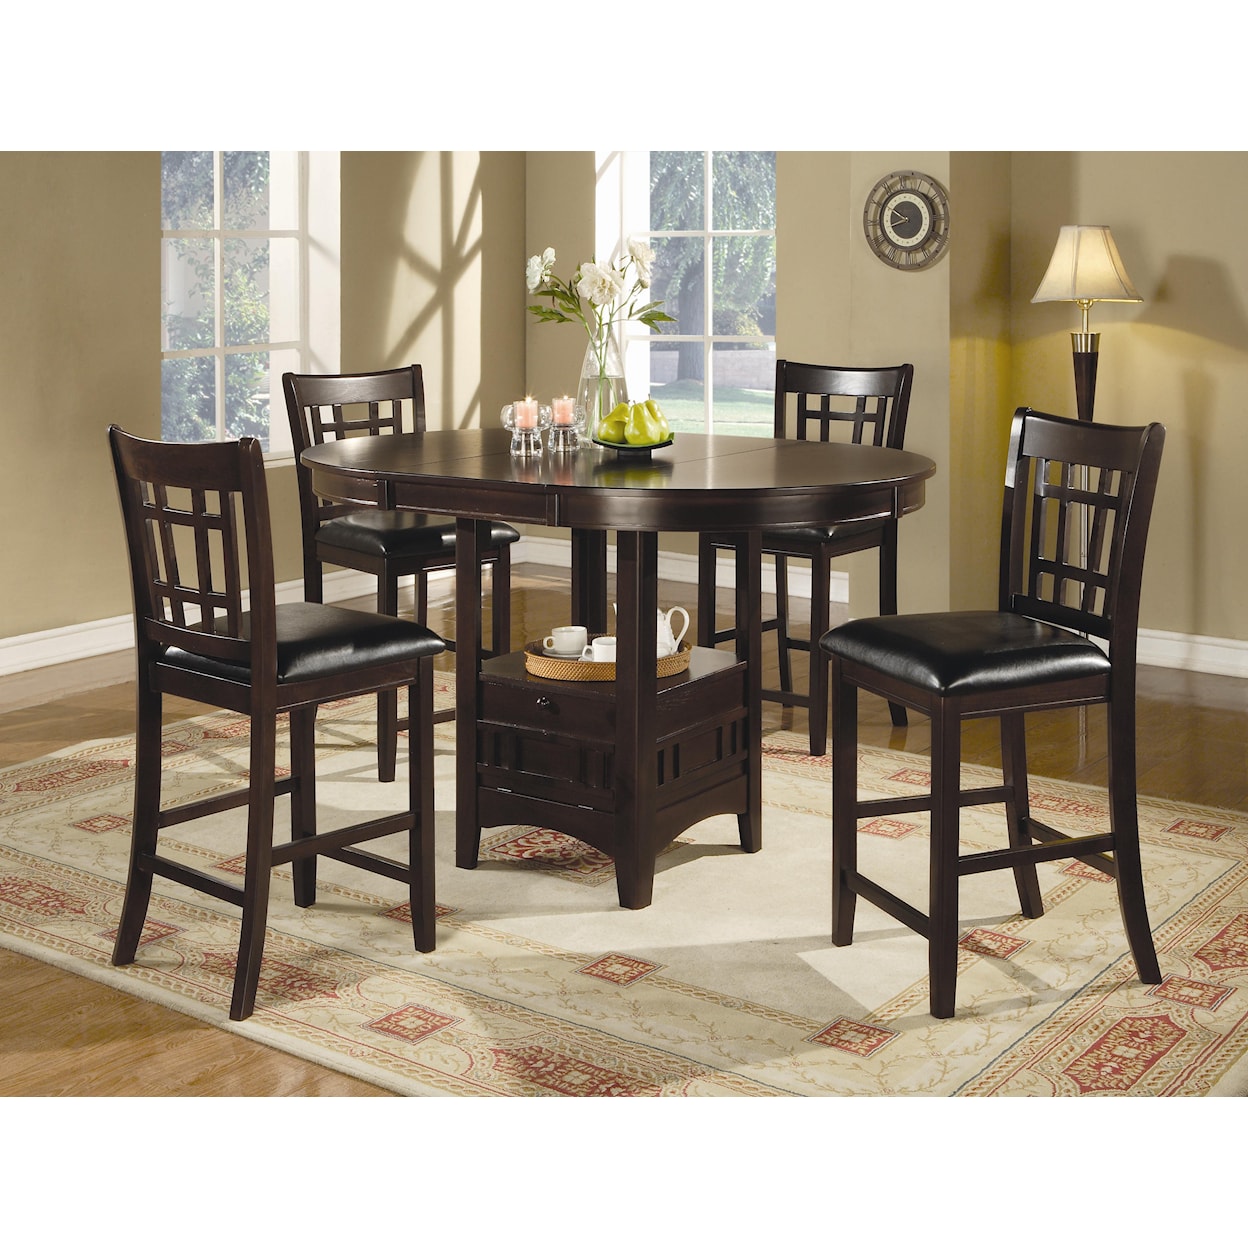 Michael Alan CSR Select Lavon 7 Piece Counter Table and Chair Set